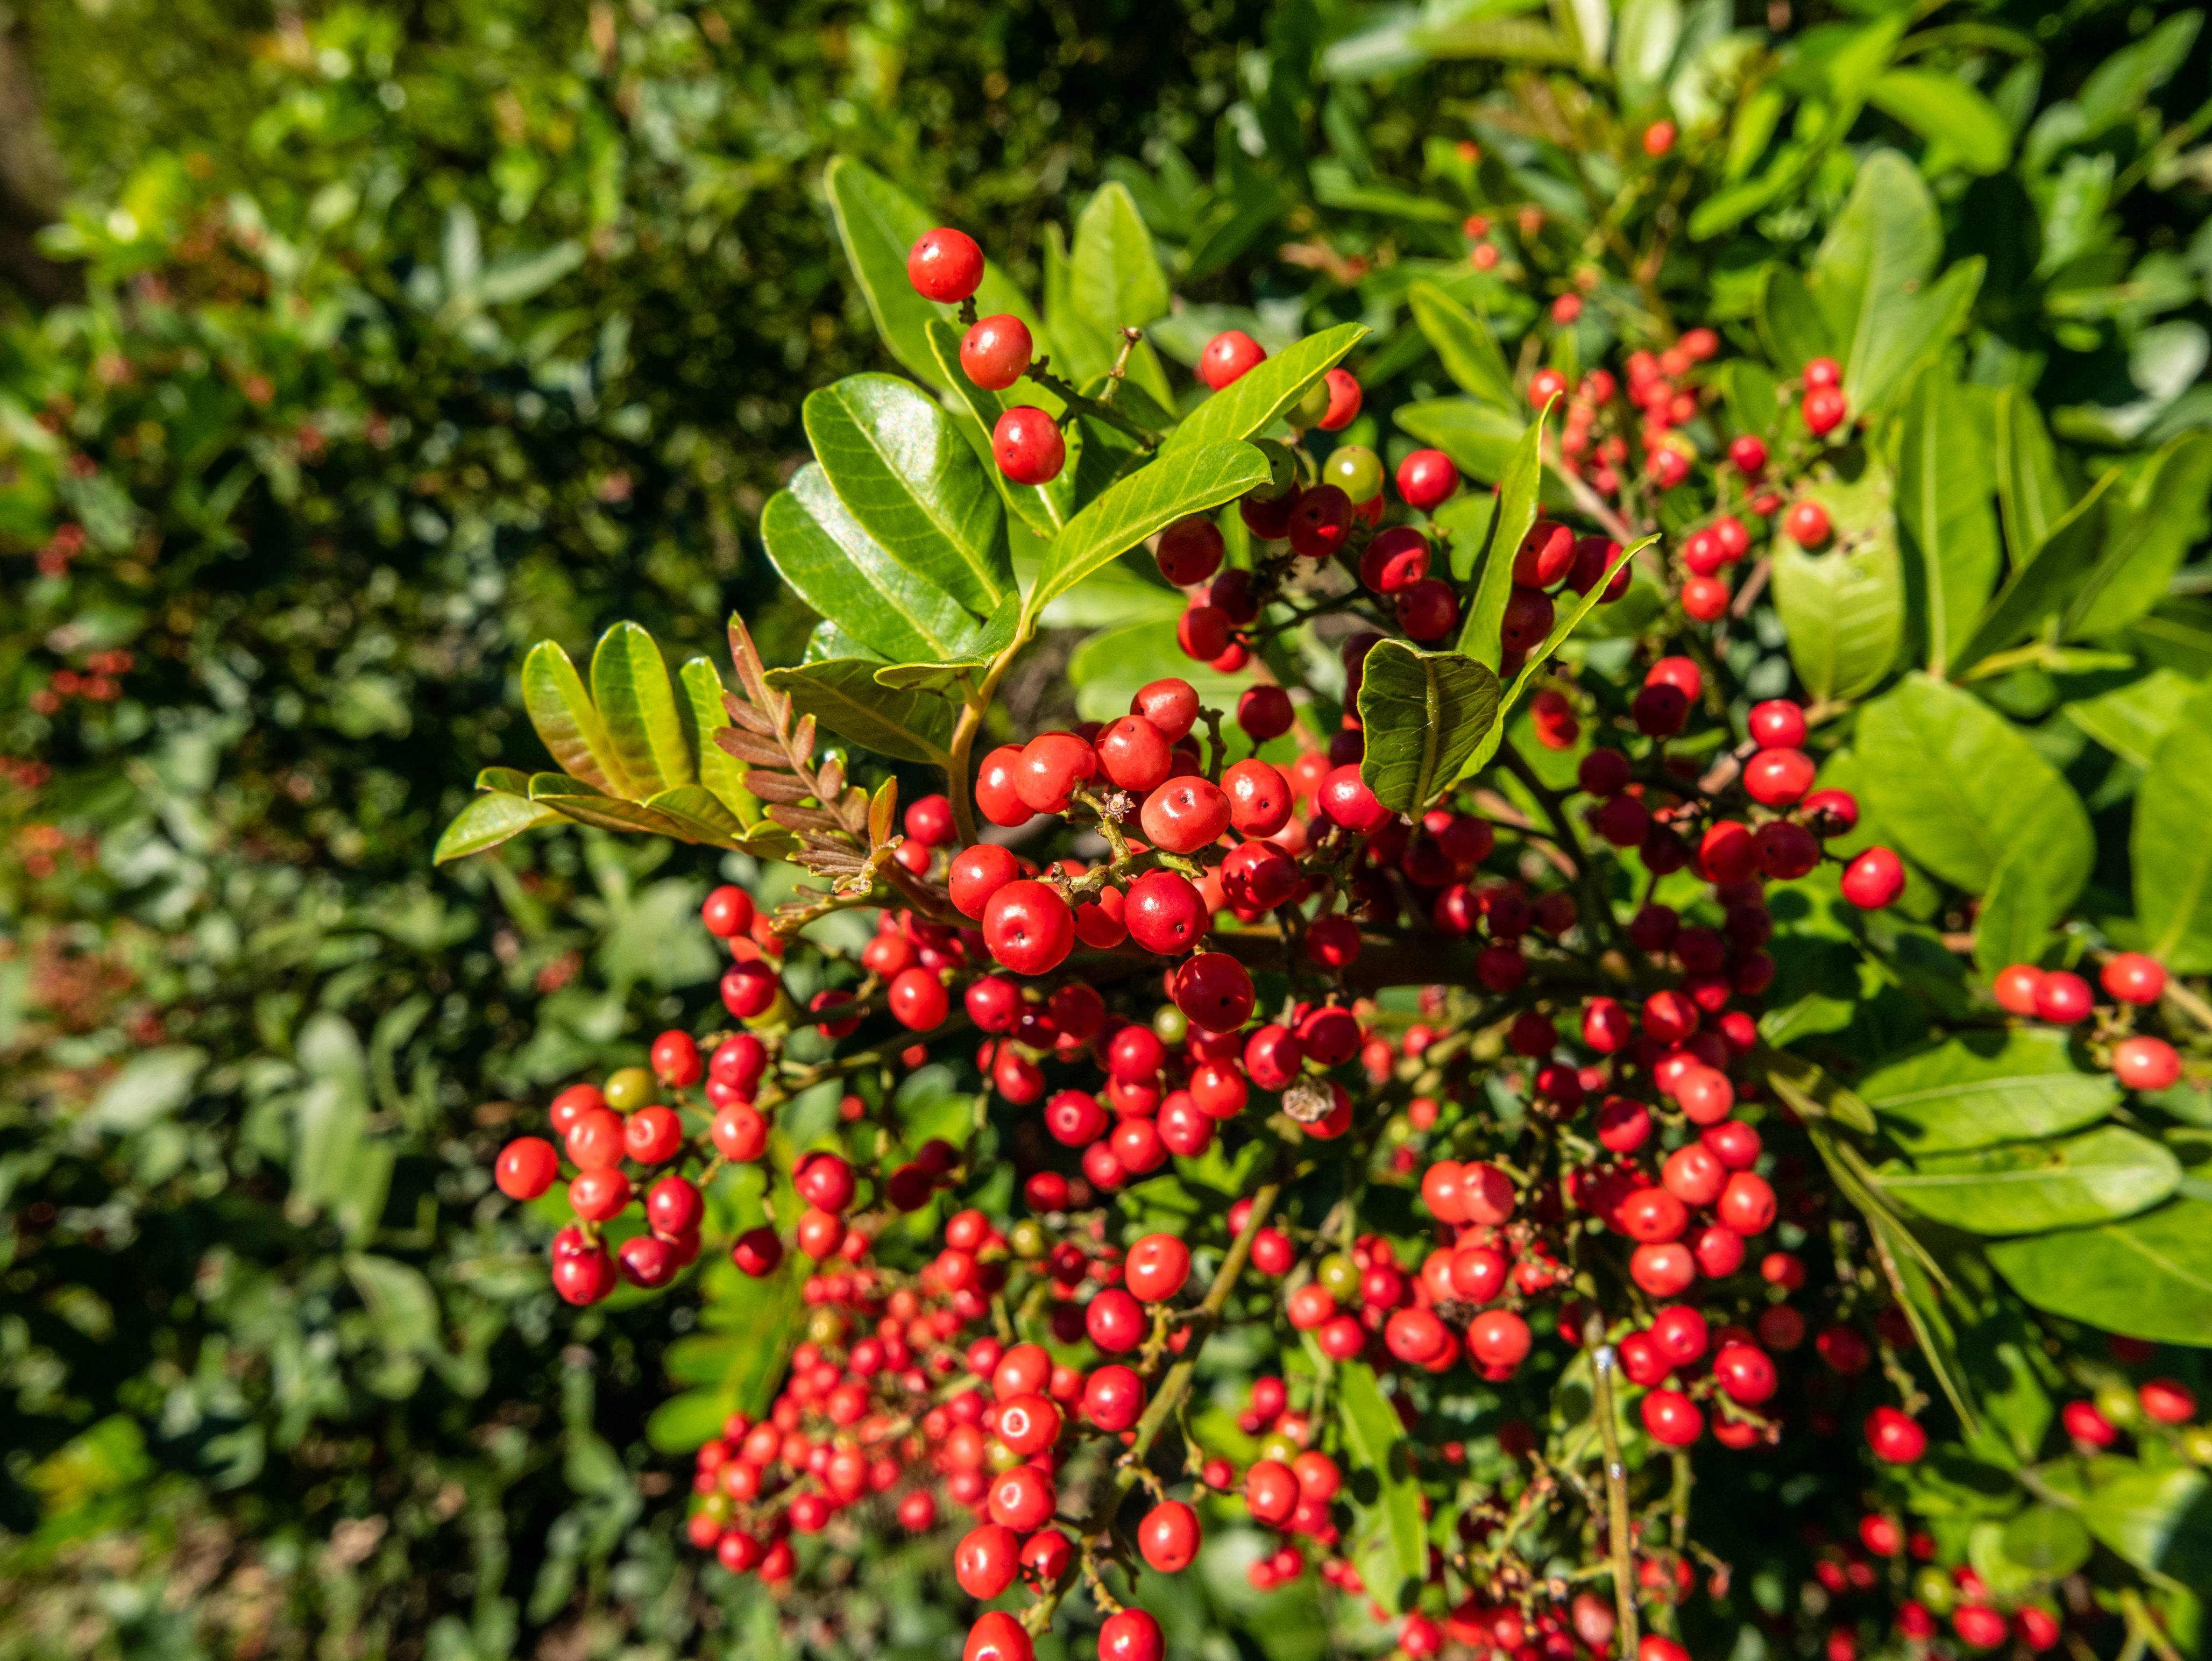 red fruits with lime-red leaves and stems